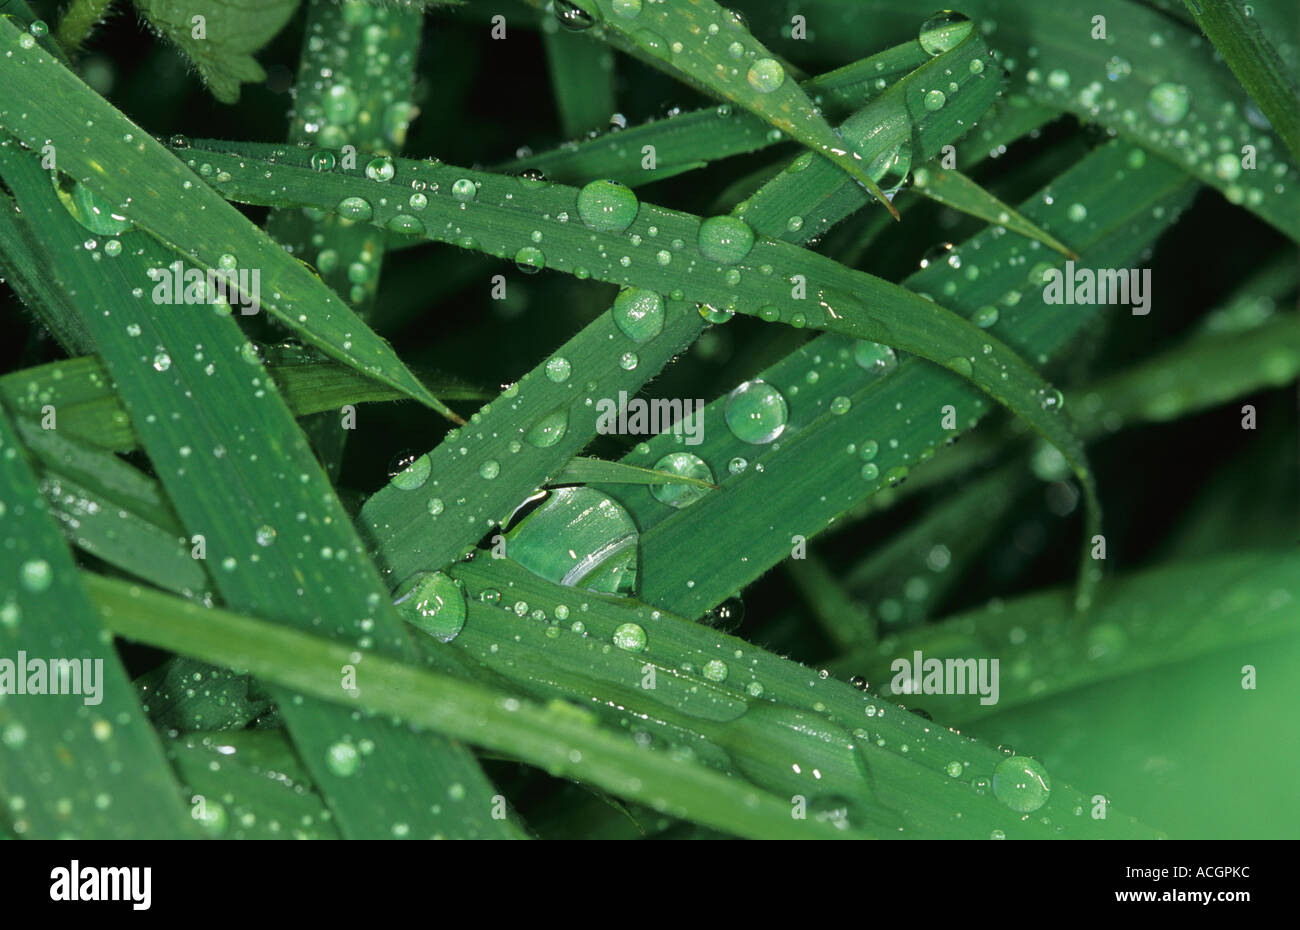 Rain water droplets on Yorkshire fog Holcus lanatus grass leaves Stock Photo